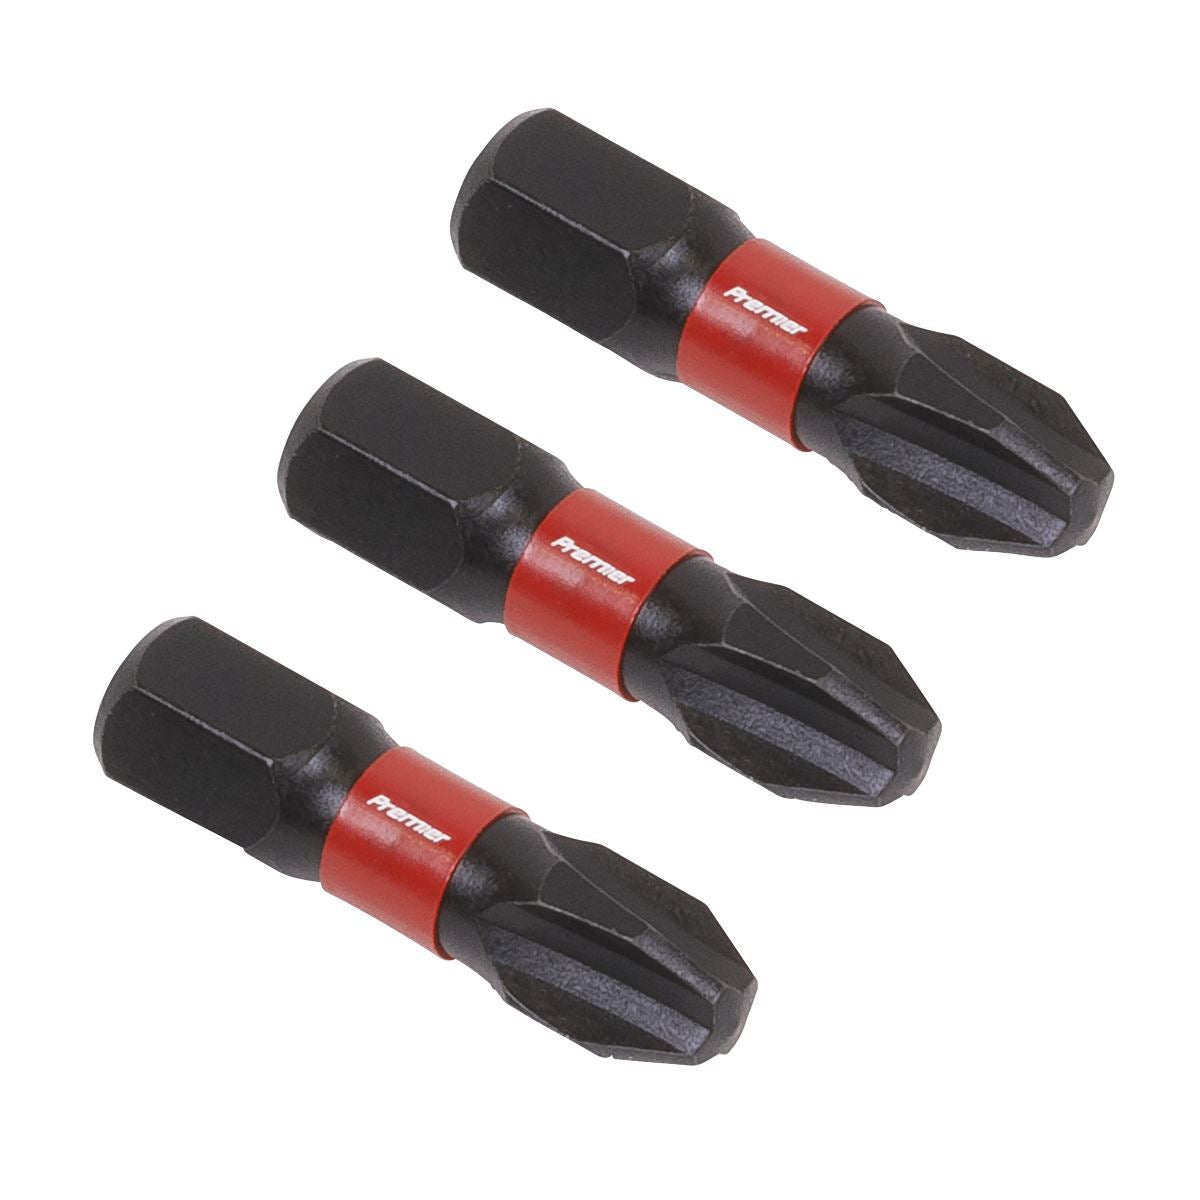 Sealey Premier Phillips #3 Impact Power Tool Bits 25mm - 3pc